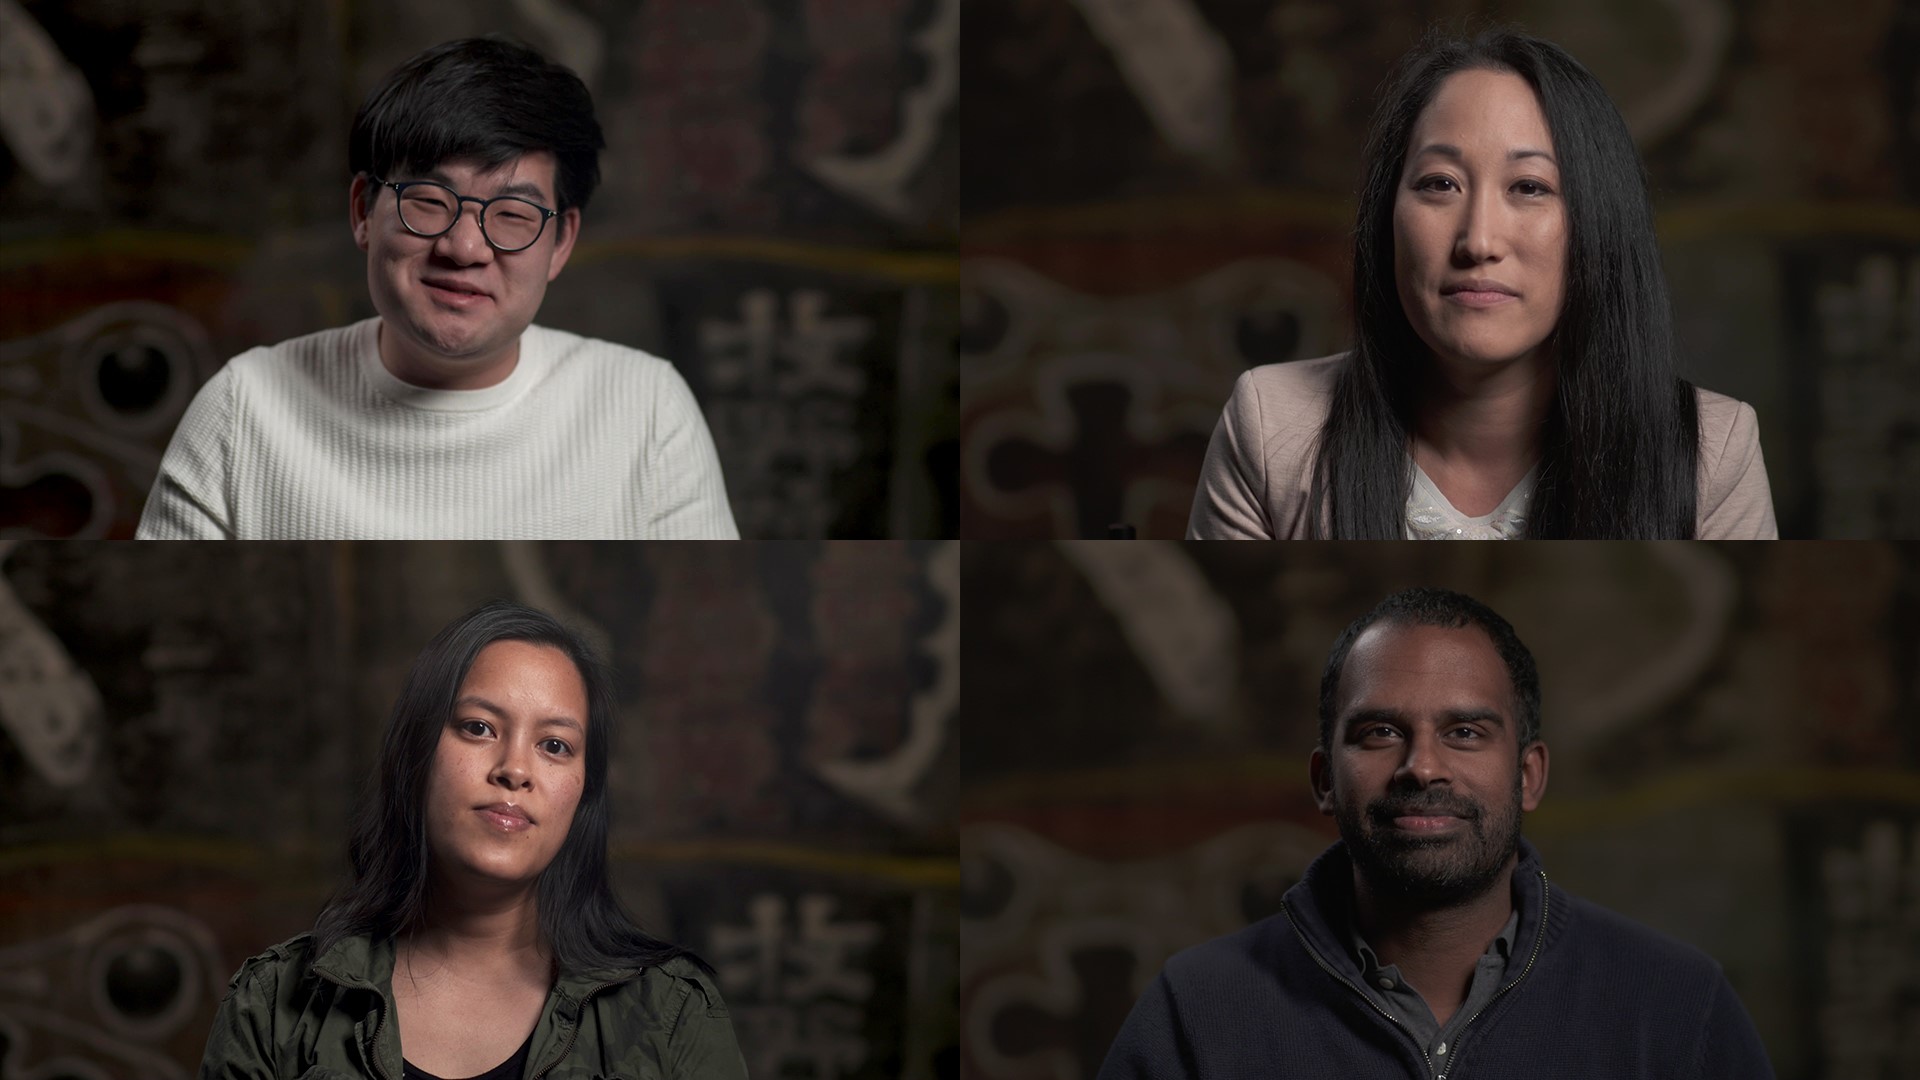 AAPI, although just four letters, represents many cultures. We sat down with members of the extended community to get their perspectives on being Asian American.